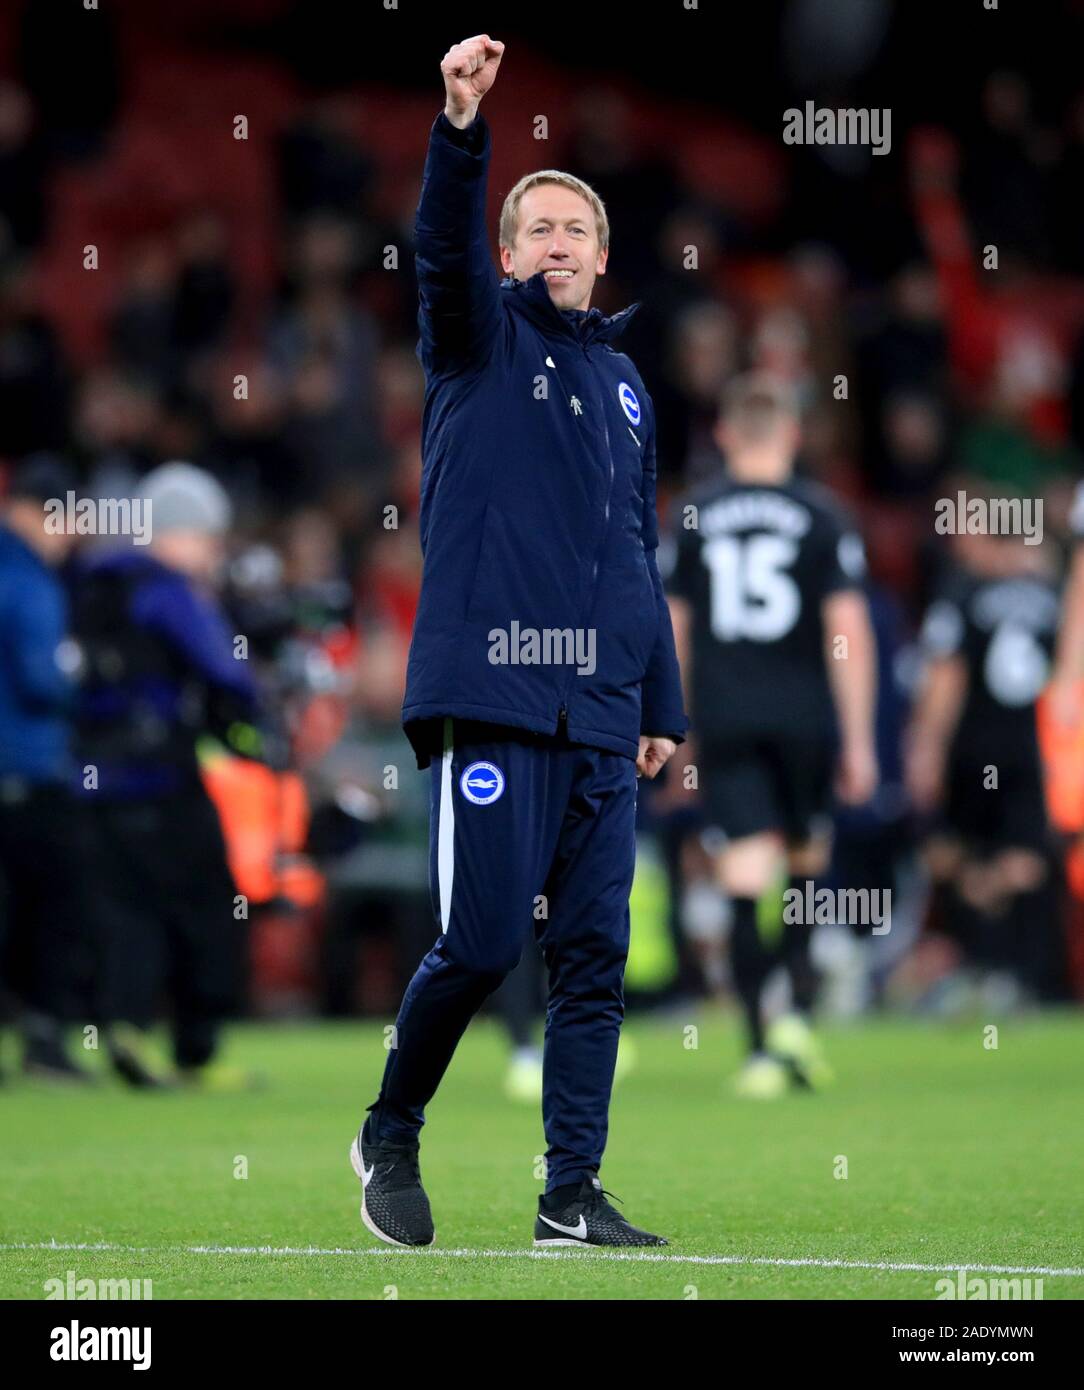 Brighton and Hove Albion manager Graham Potter celebrates the results at the end of the Premier League match at the Emirates Stadium, London. Stock Photo